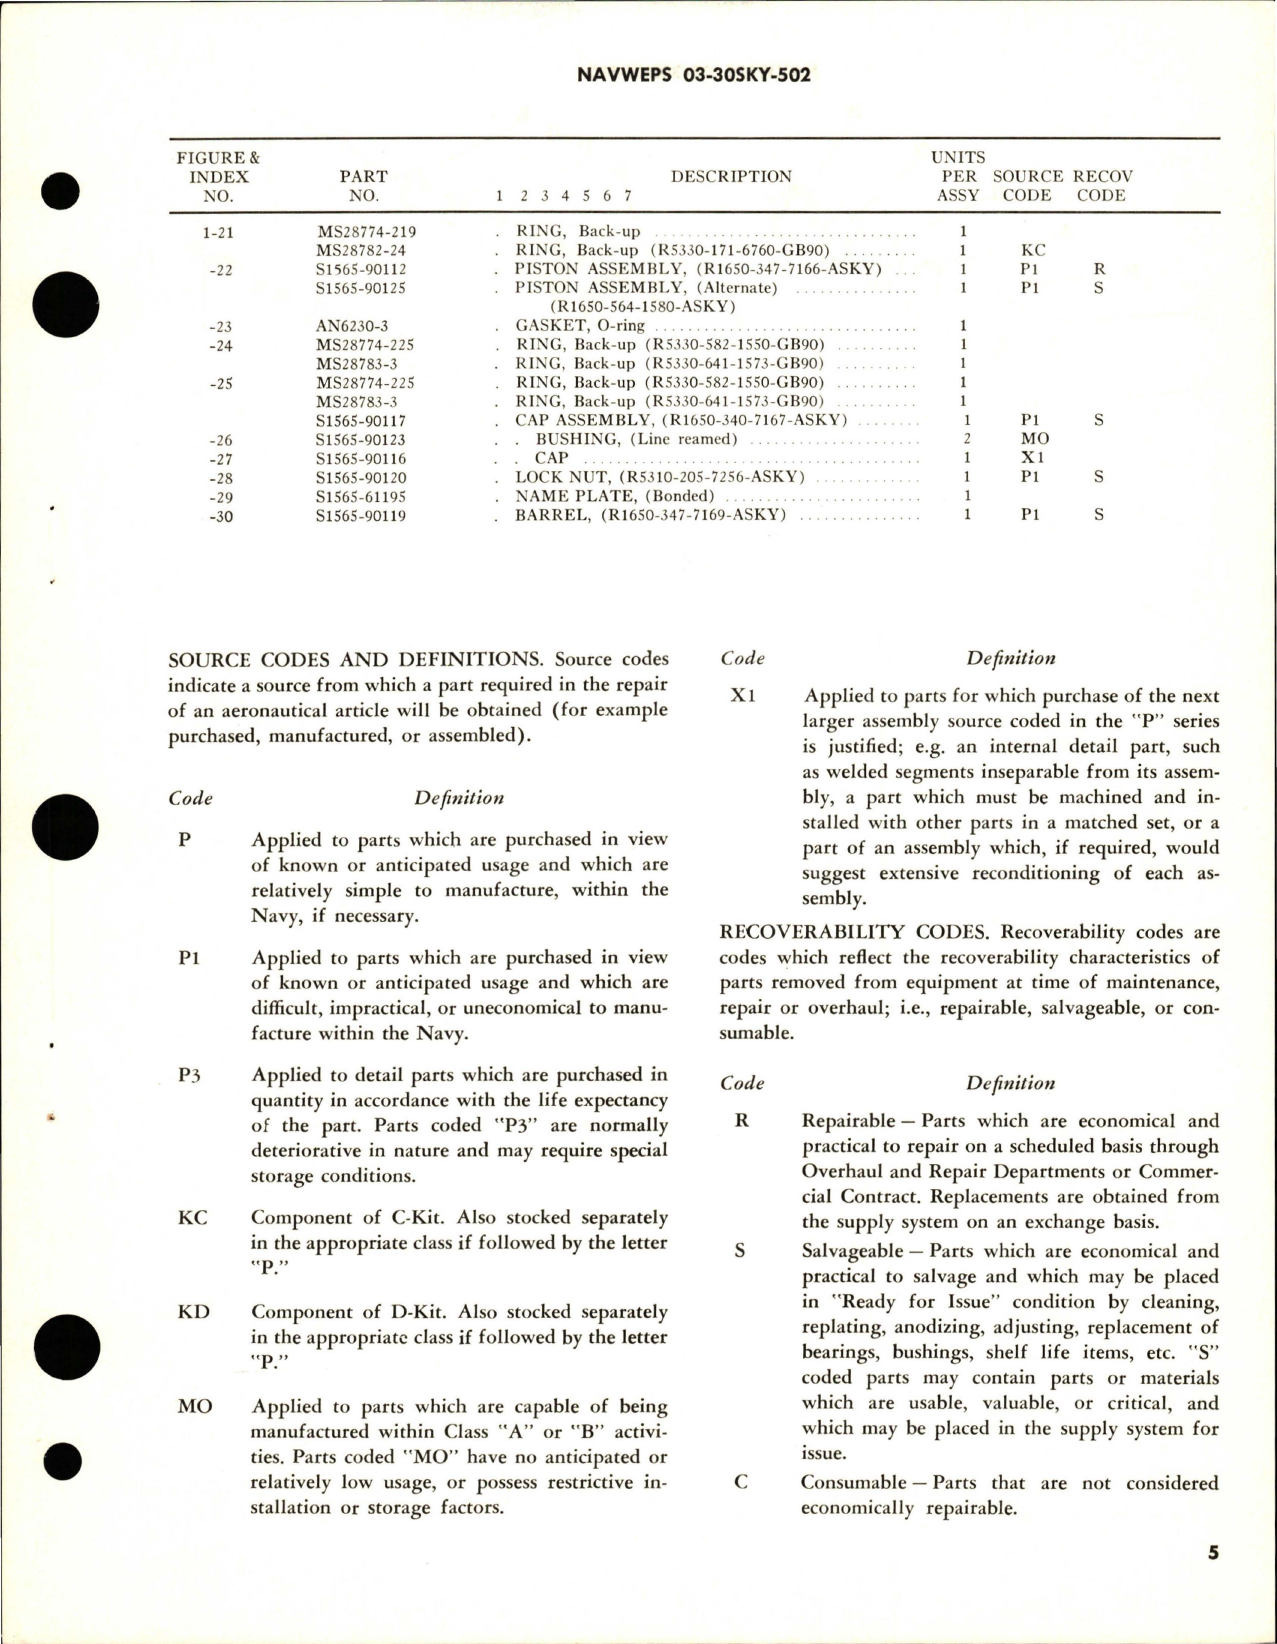 Sample page 5 from AirCorps Library document: Overhaul Instructions with Parts for Main Landing Gear Hydraulic Cylinder Assy - S1565-90111 